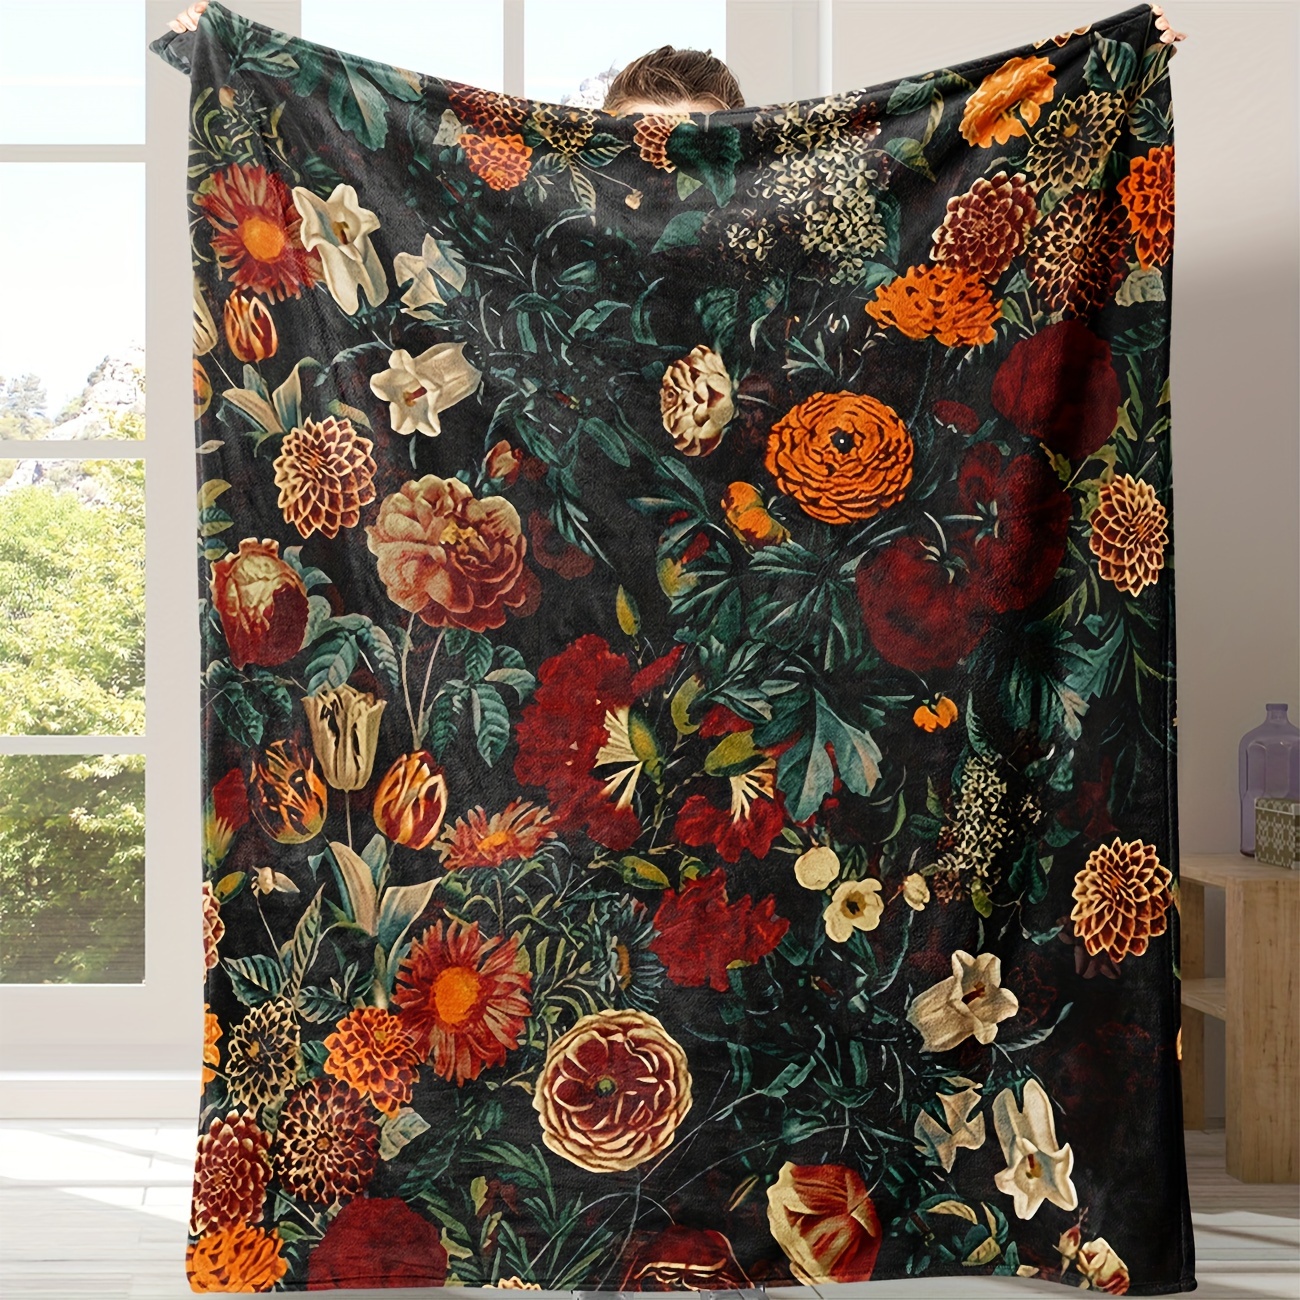 

1pc Flower Blanket, Soft And Comfortable Flannel Blanket, For School Dormitory Office Lunch Break, Warm And Comfortable 4 Seasons Camping Blanket